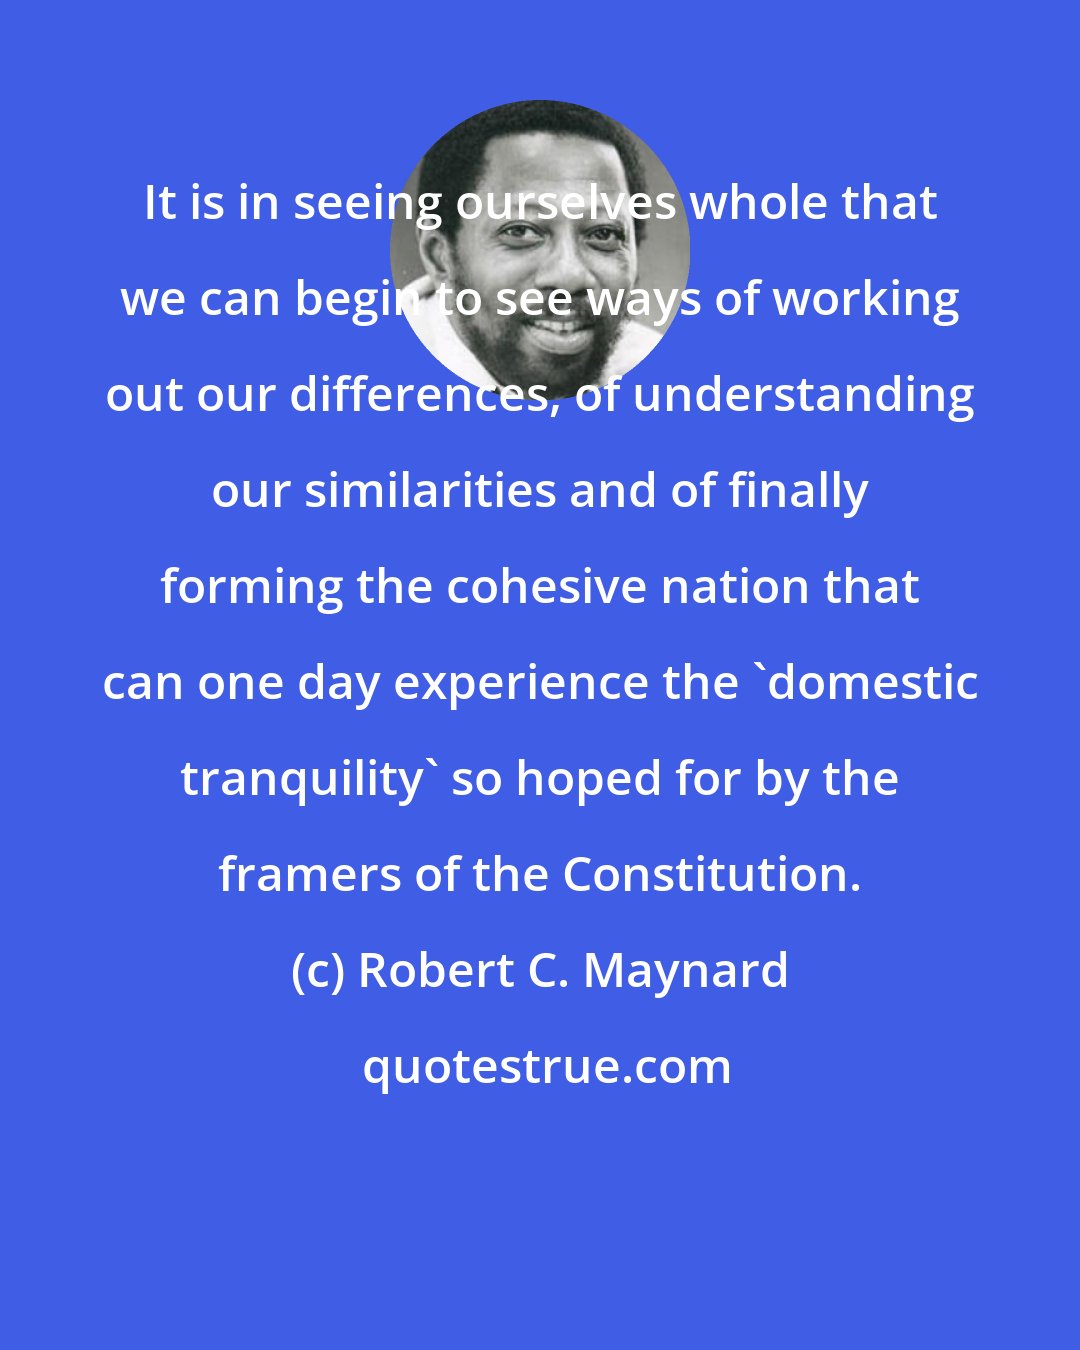 Robert C. Maynard: It is in seeing ourselves whole that we can begin to see ways of working out our differences, of understanding our similarities and of finally forming the cohesive nation that can one day experience the 'domestic tranquility' so hoped for by the framers of the Constitution.